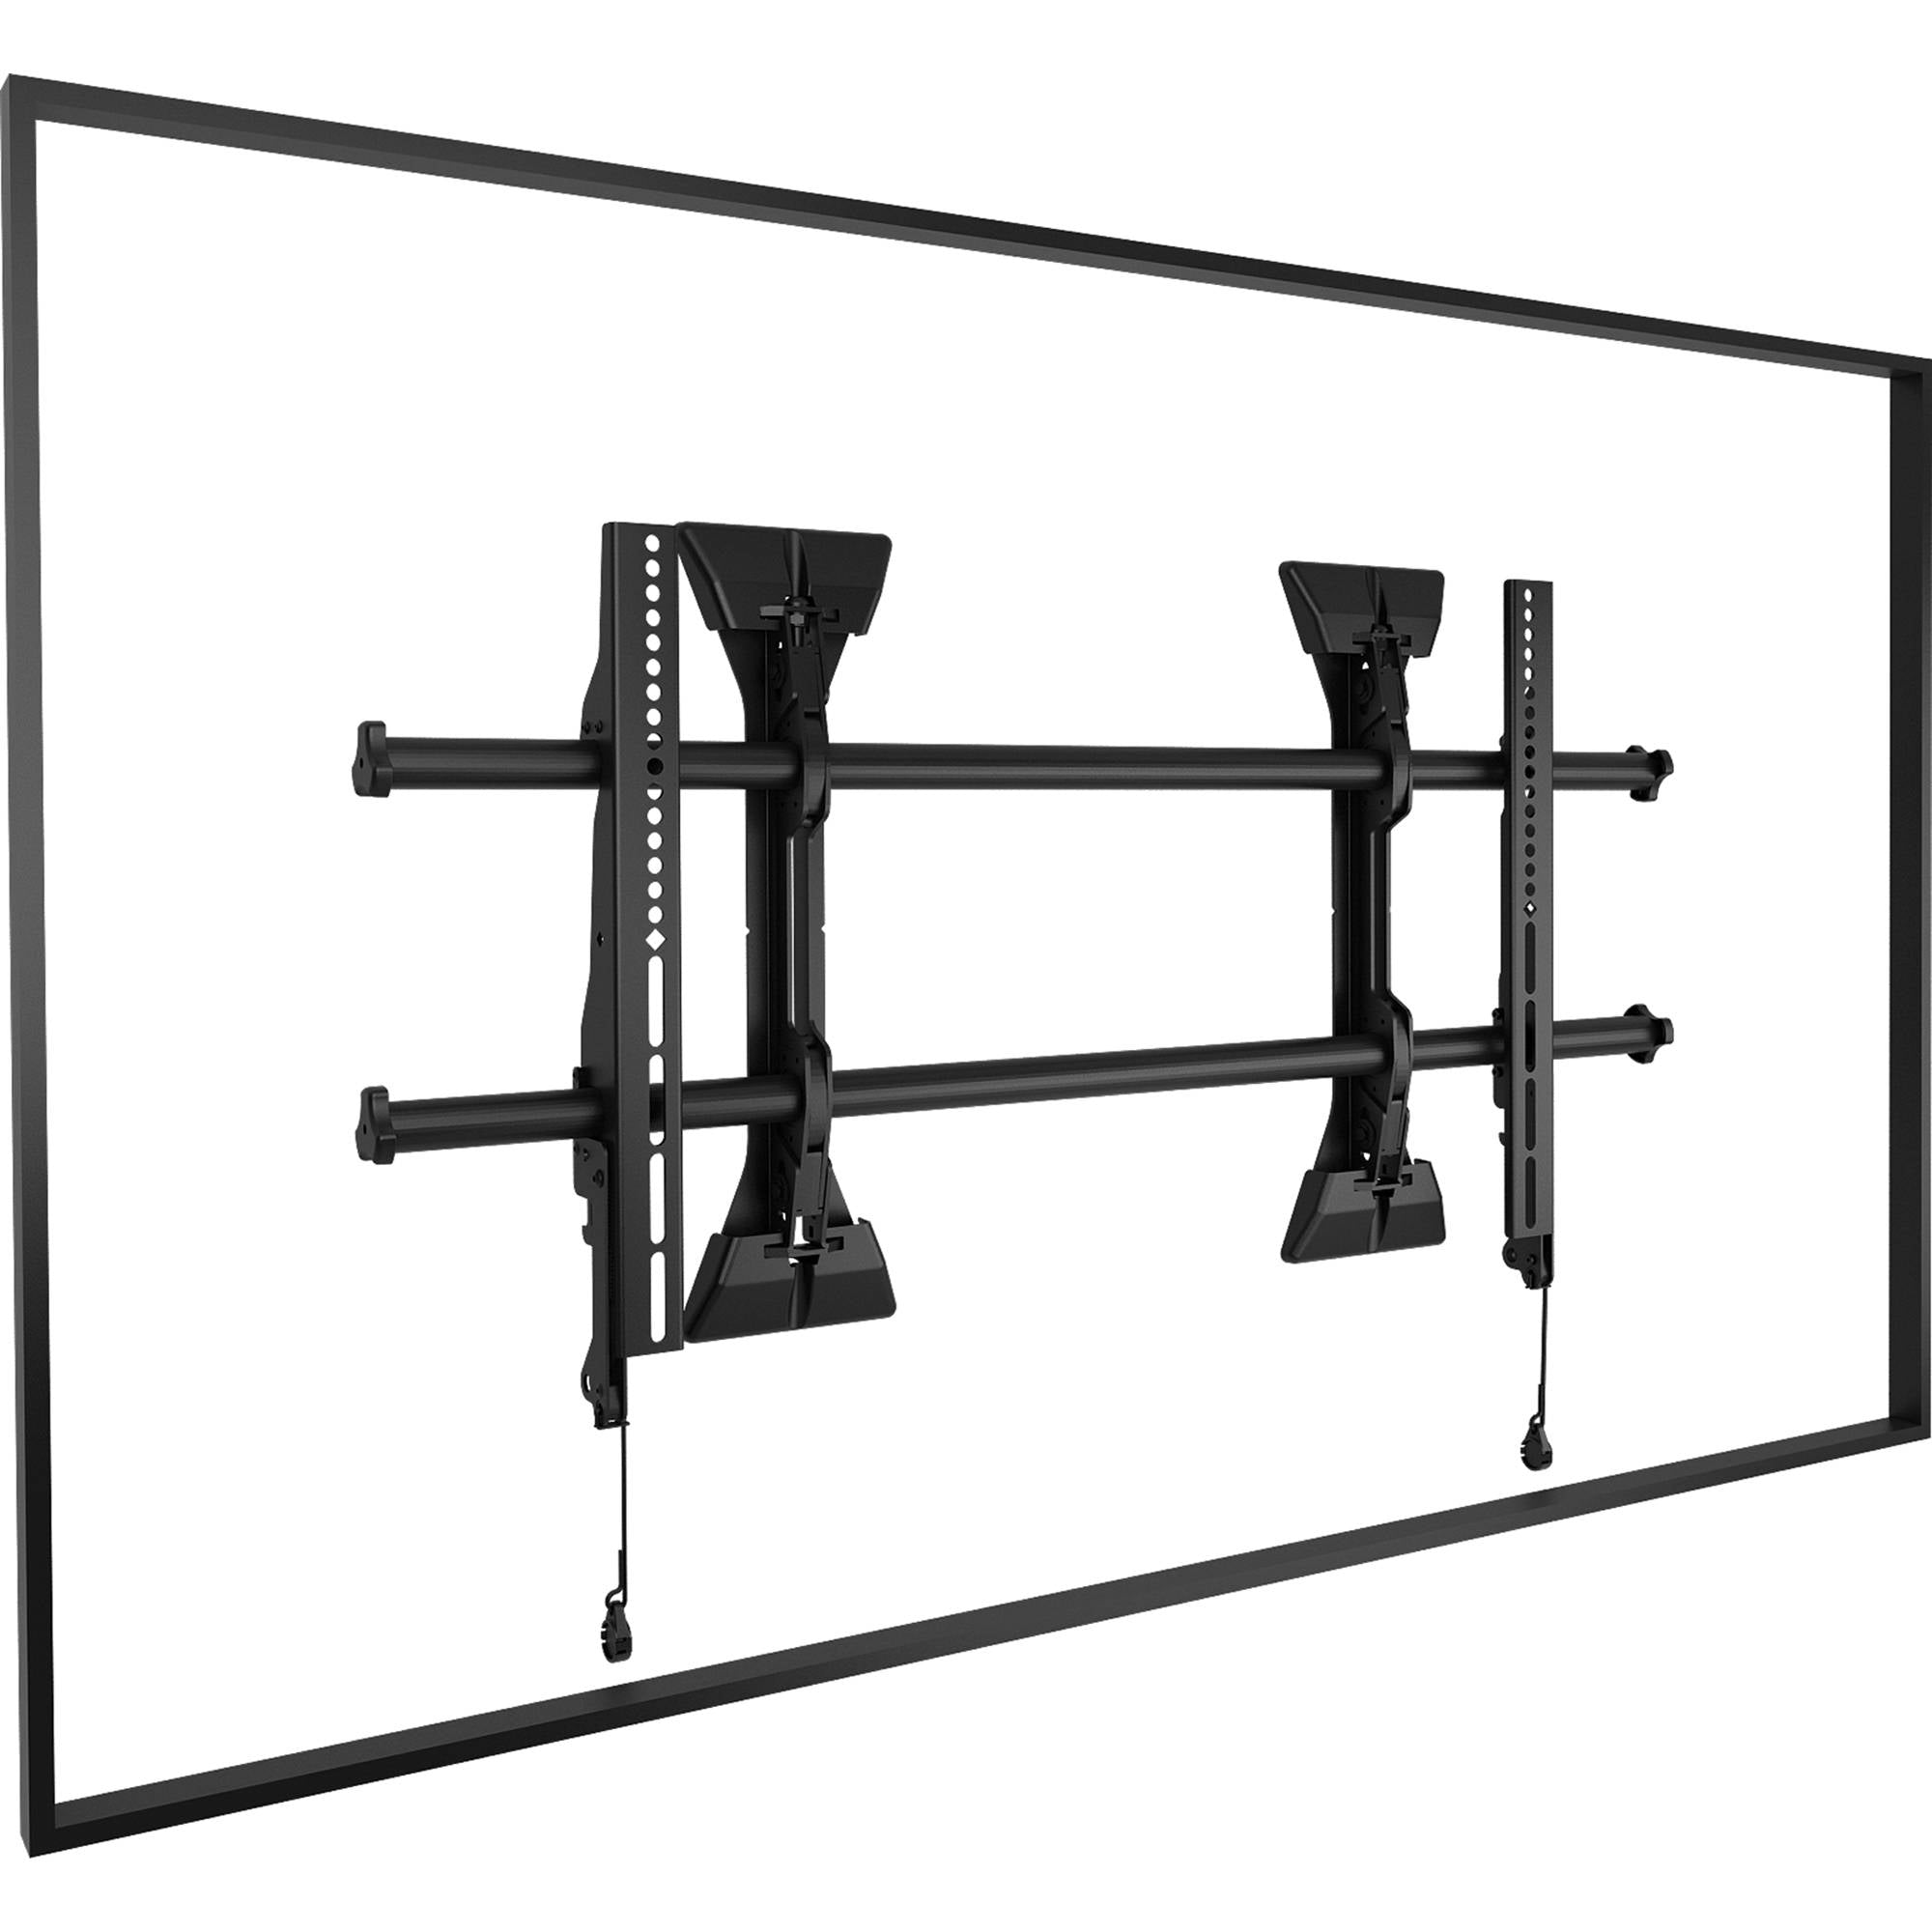 Chief LSM1U Large Fixed Wall Mount